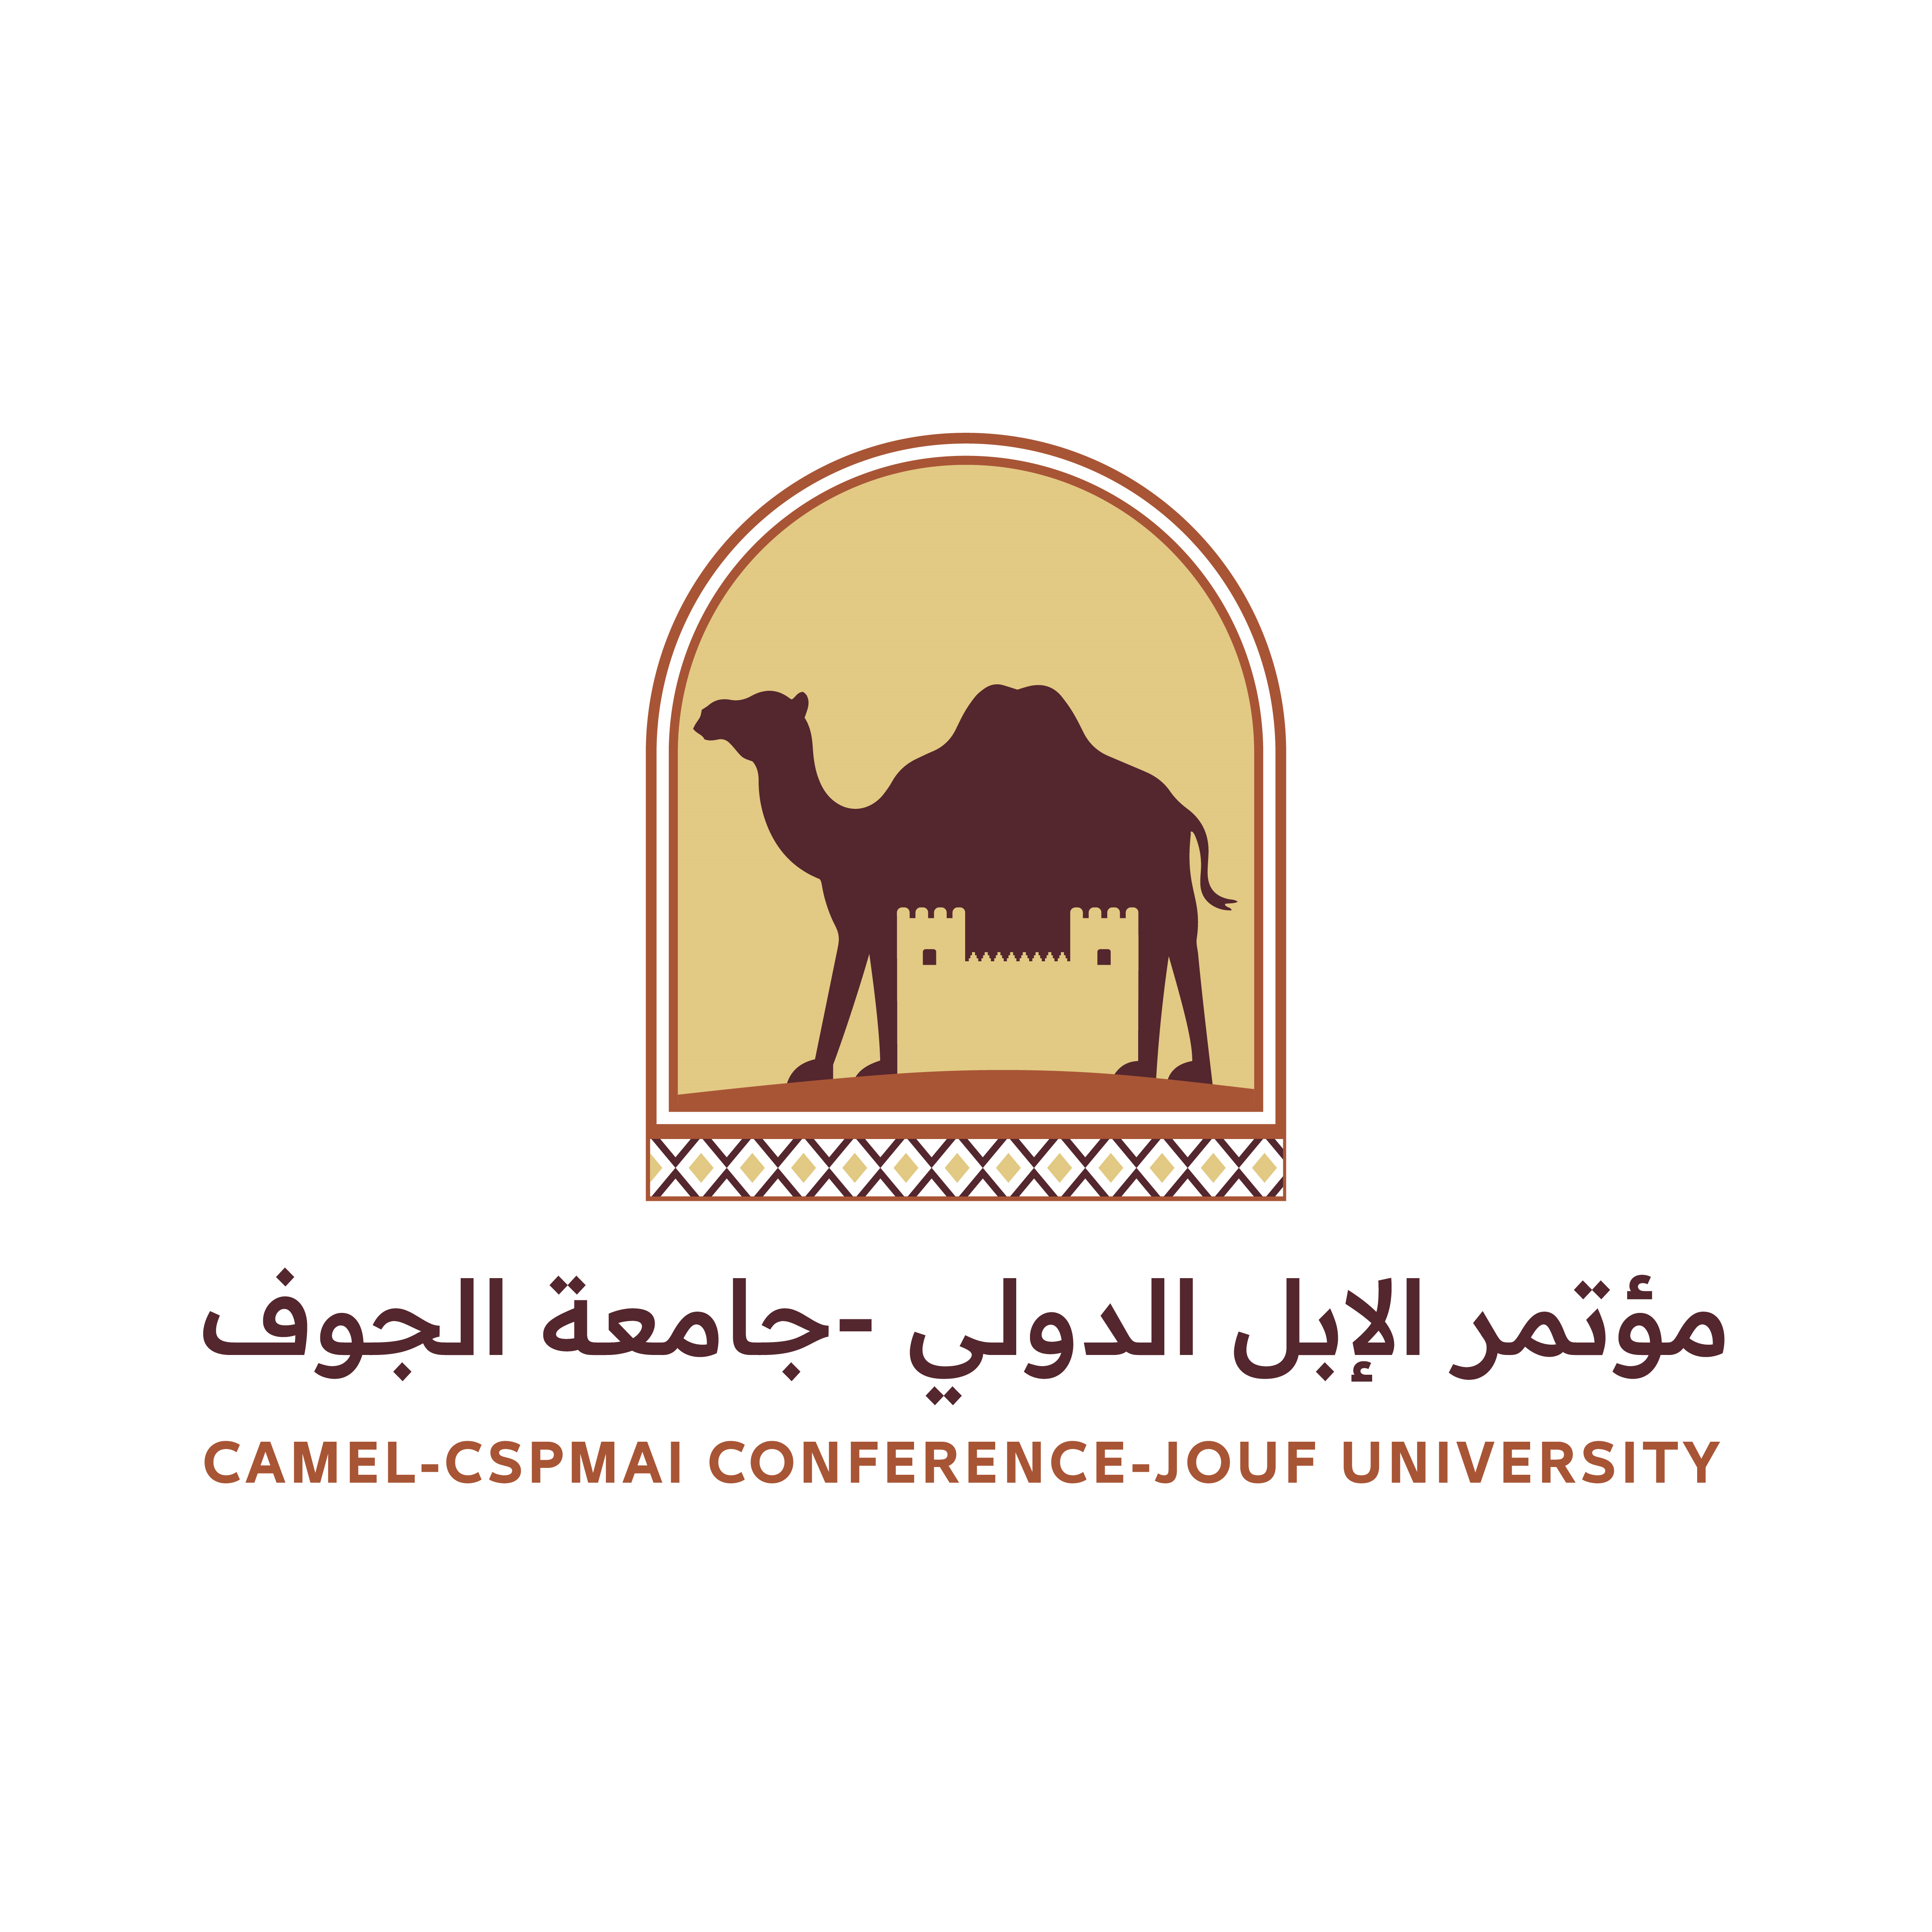 To register in the international conference of the Camels